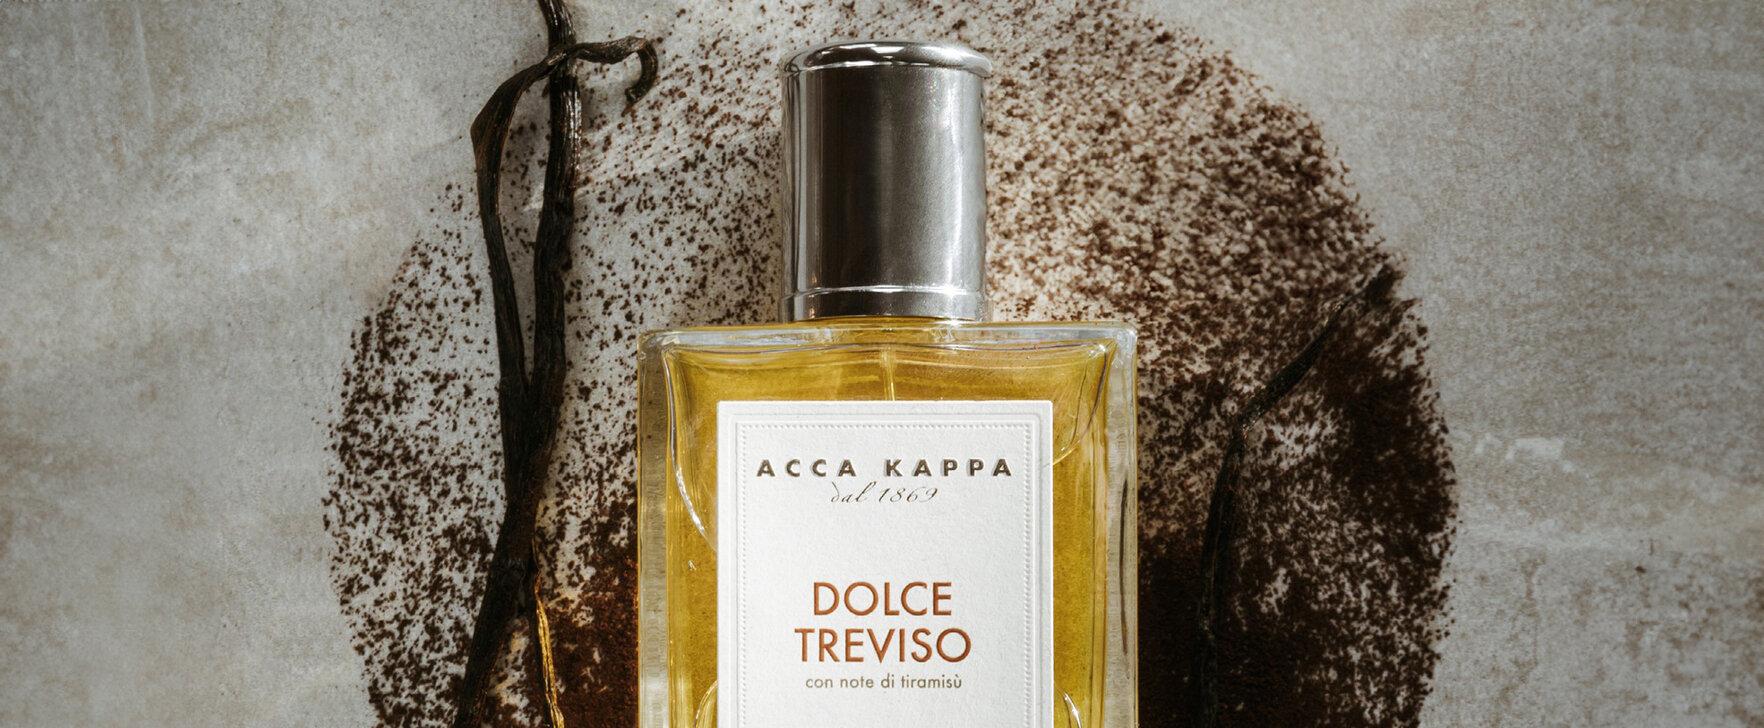 A Fragrance Trip to Treviso: The New "Dolce Treviso" Eau de Parfum From Acca Kappa